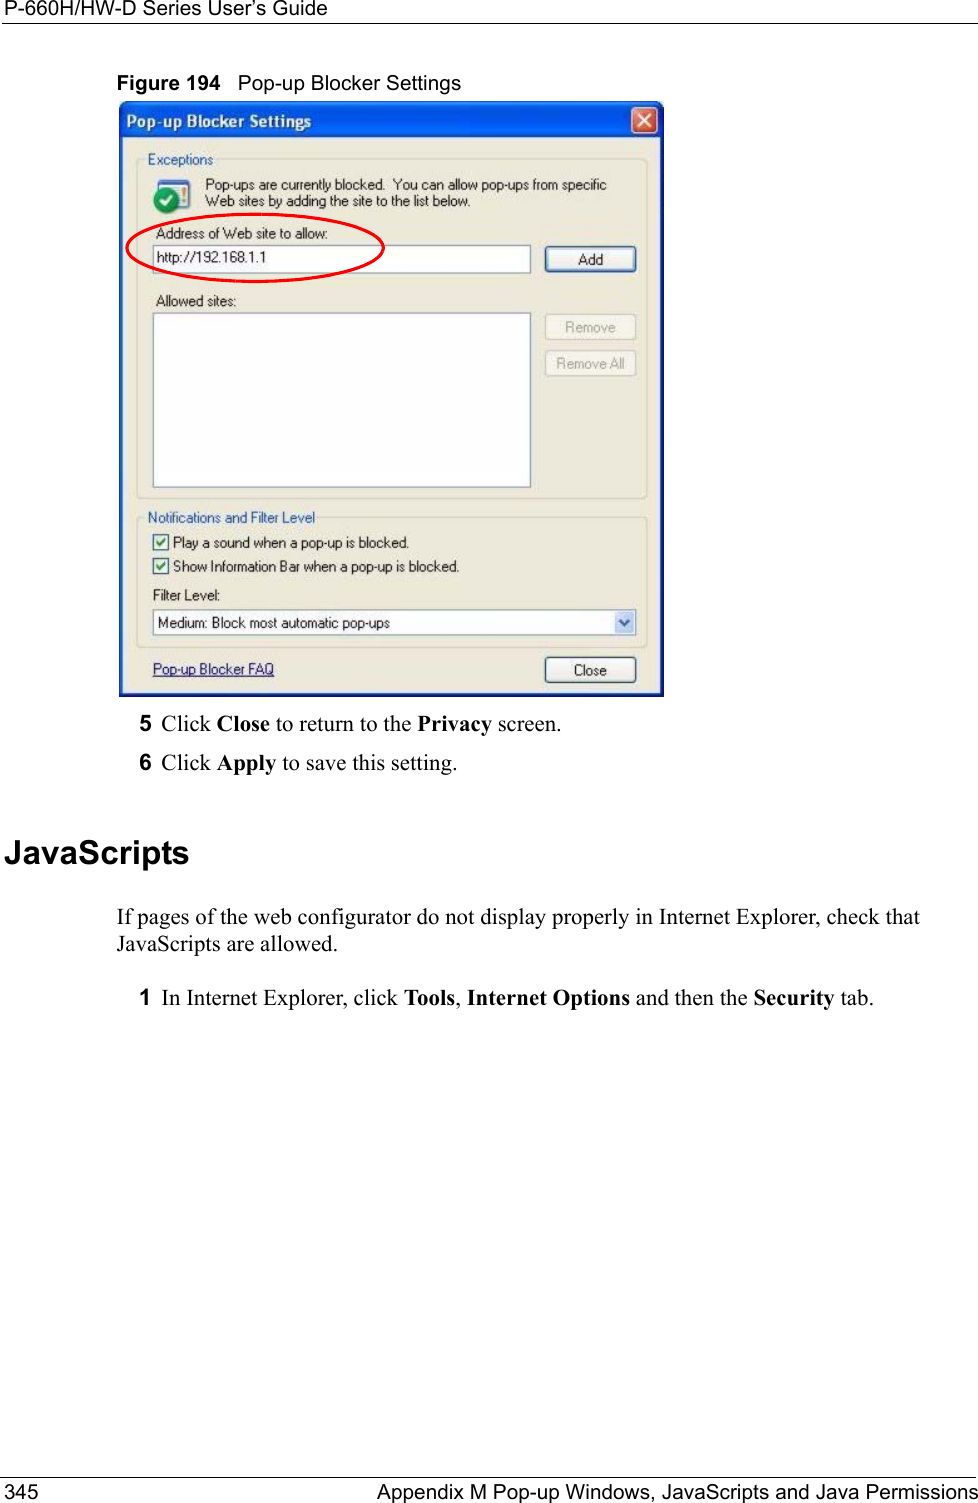 P-660H/HW-D Series User’s Guide345 Appendix M Pop-up Windows, JavaScripts and Java PermissionsFigure 194   Pop-up Blocker Settings5Click Close to return to the Privacy screen. 6Click Apply to save this setting. JavaScriptsIf pages of the web configurator do not display properly in Internet Explorer, check that JavaScripts are allowed. 1In Internet Explorer, click Tools, Internet Options and then the Security tab. 